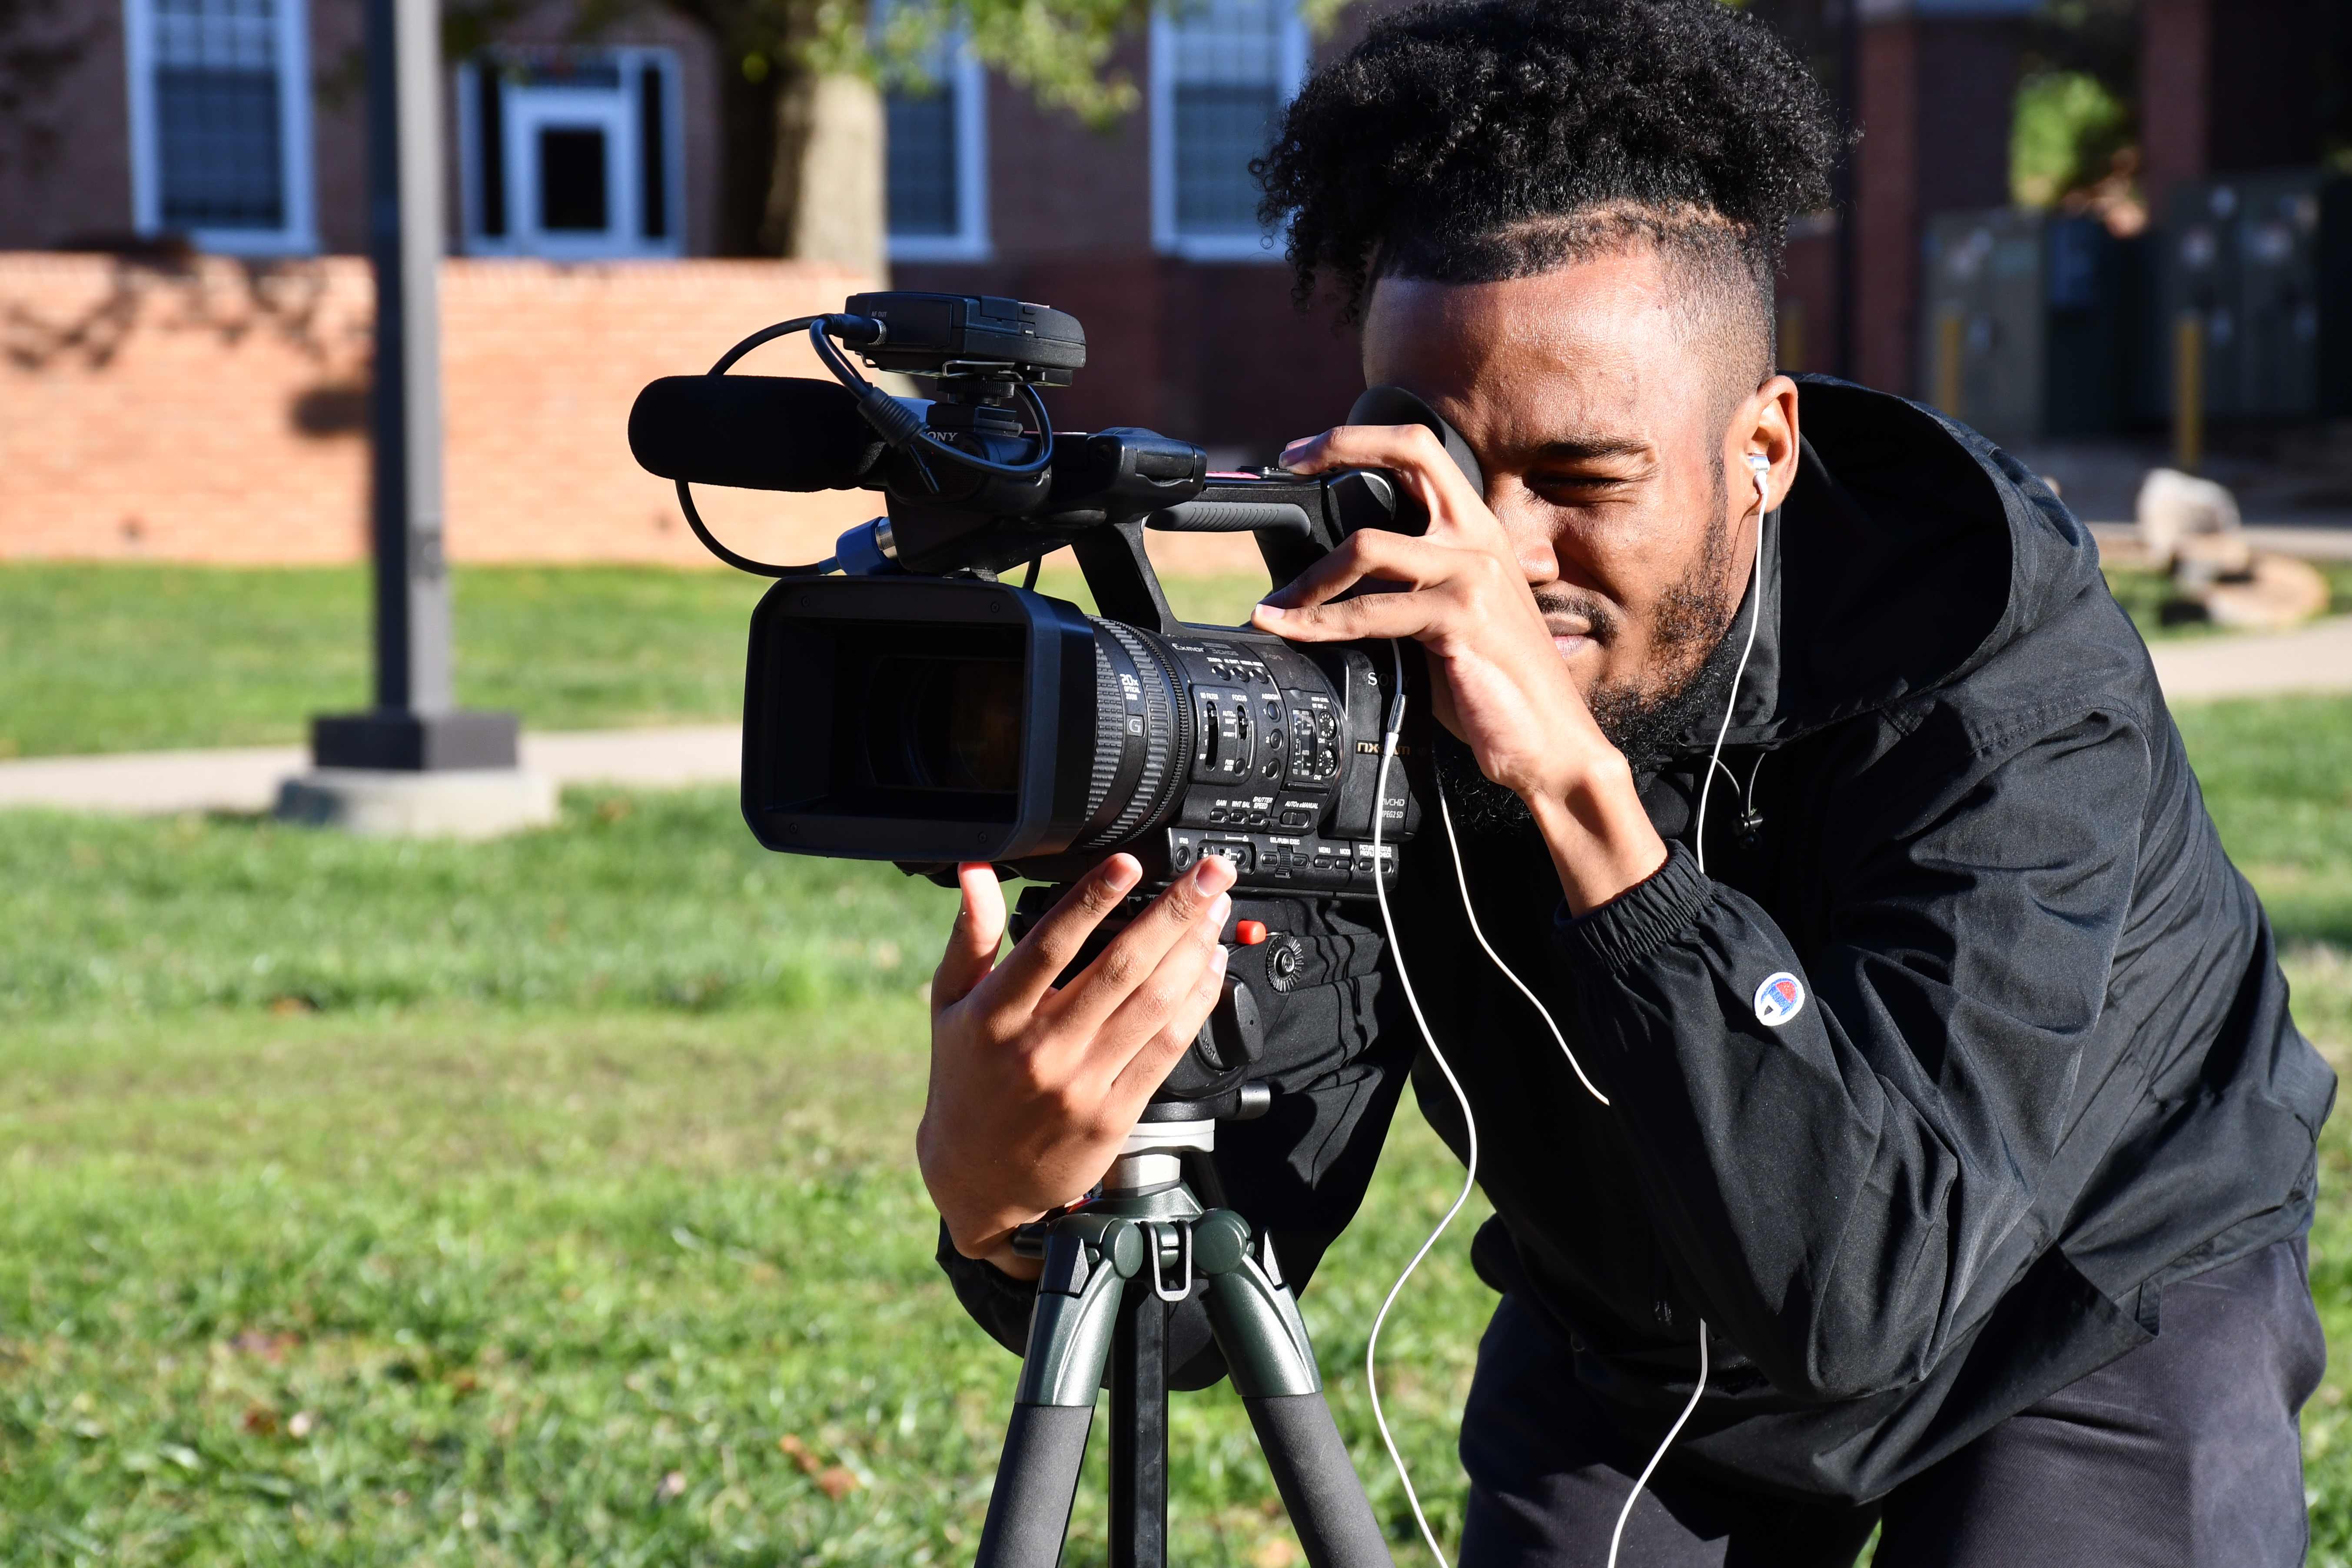 Videography student